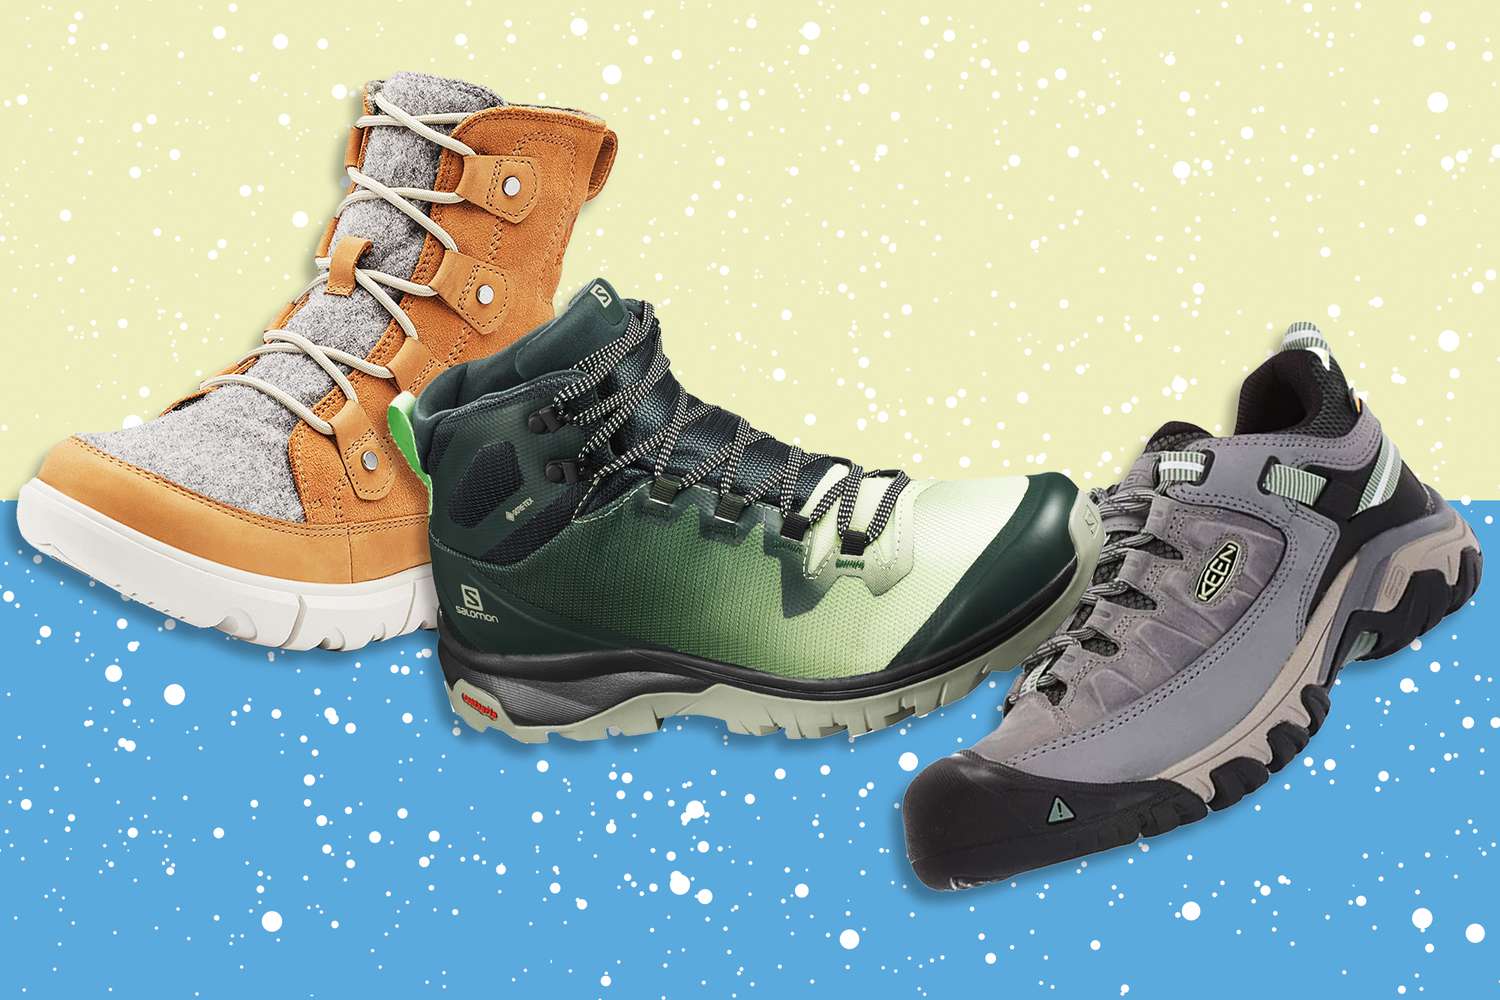 muscle tone vegetarian 4 of the Best Boots for Winter Walking, According to Thousands of Reviews |  EatingWell